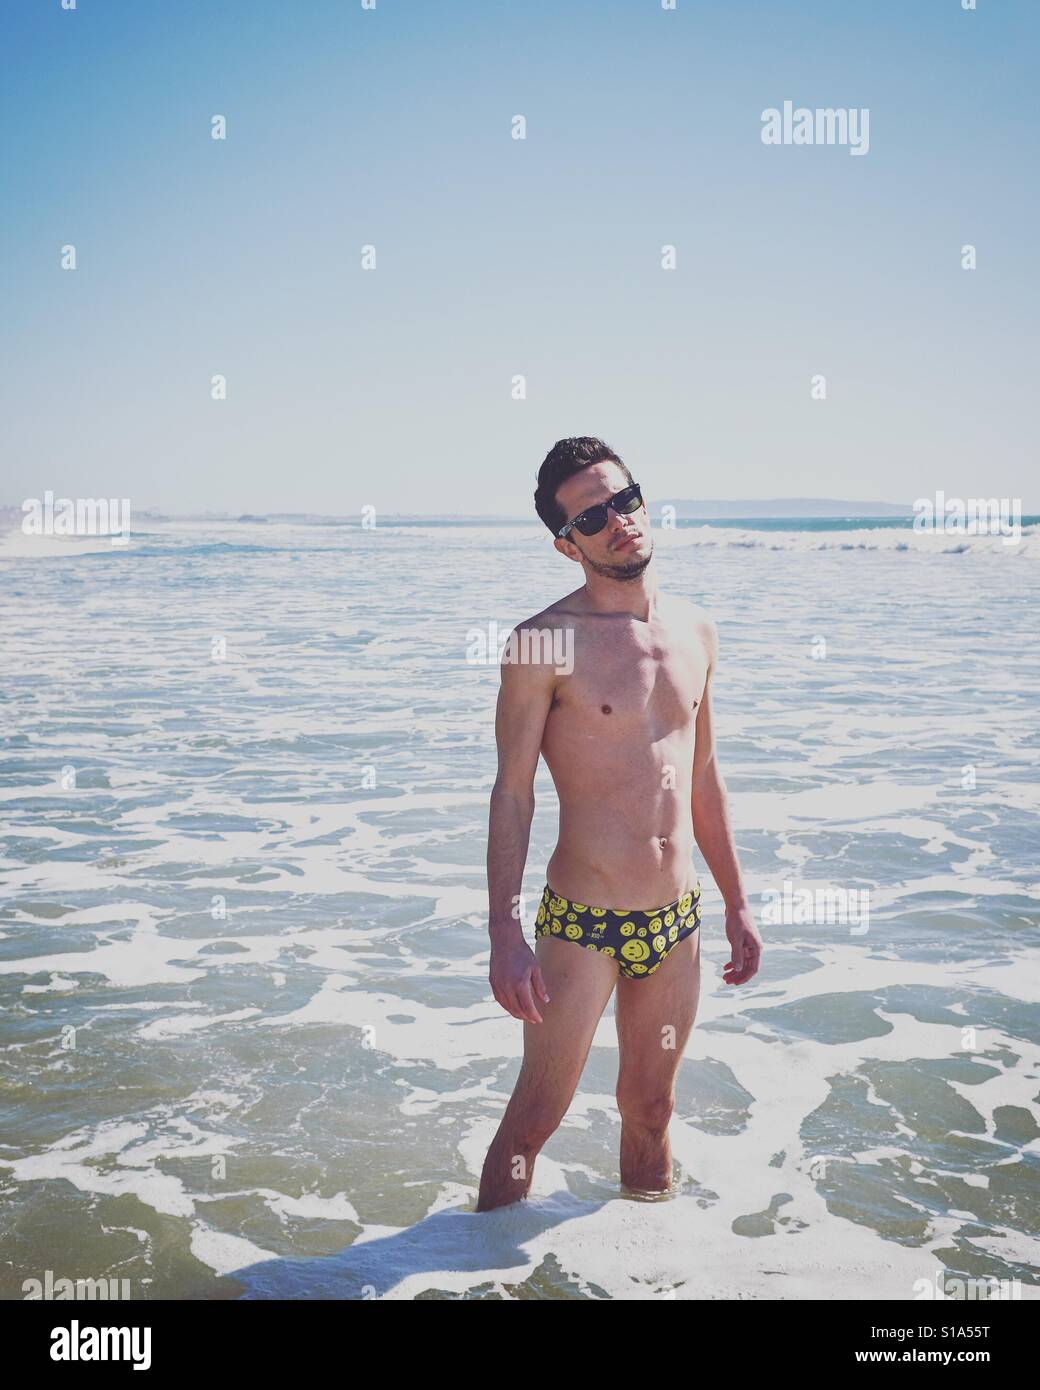 Speedo Beach High Resolution Stock Photography and Images - Alamy